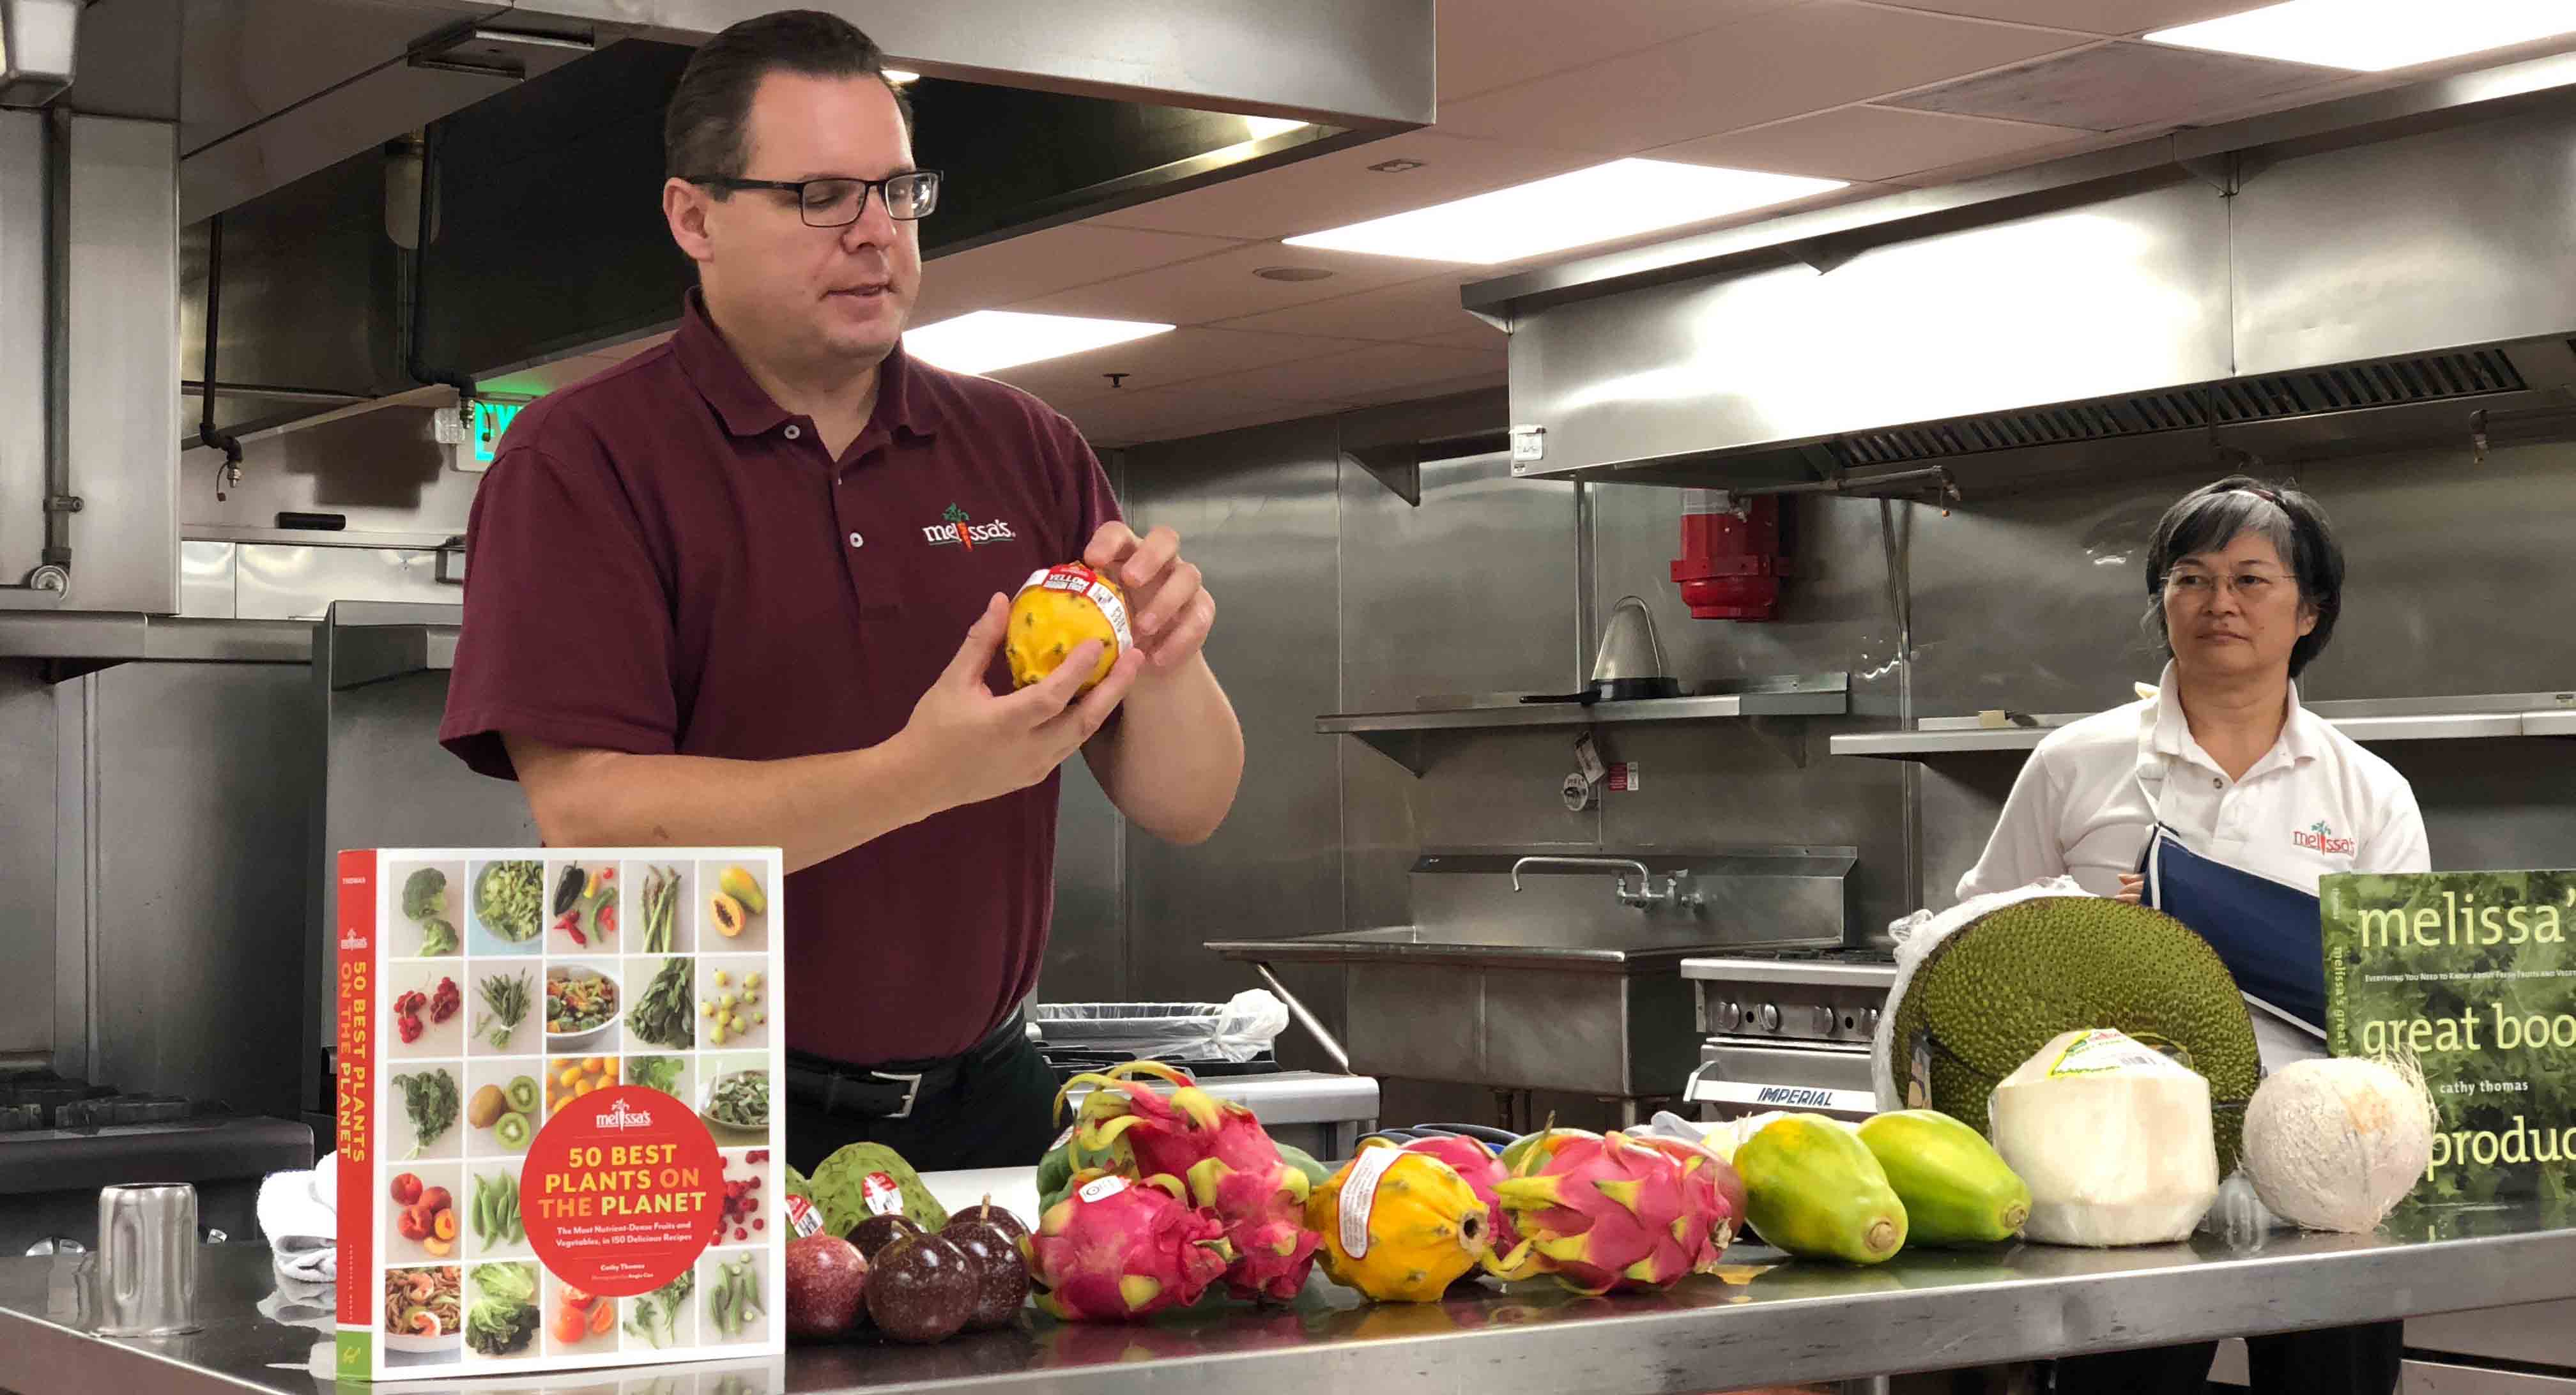 Robert Schueller presents exotic fruits from Melissa's Produce at ICE LA.